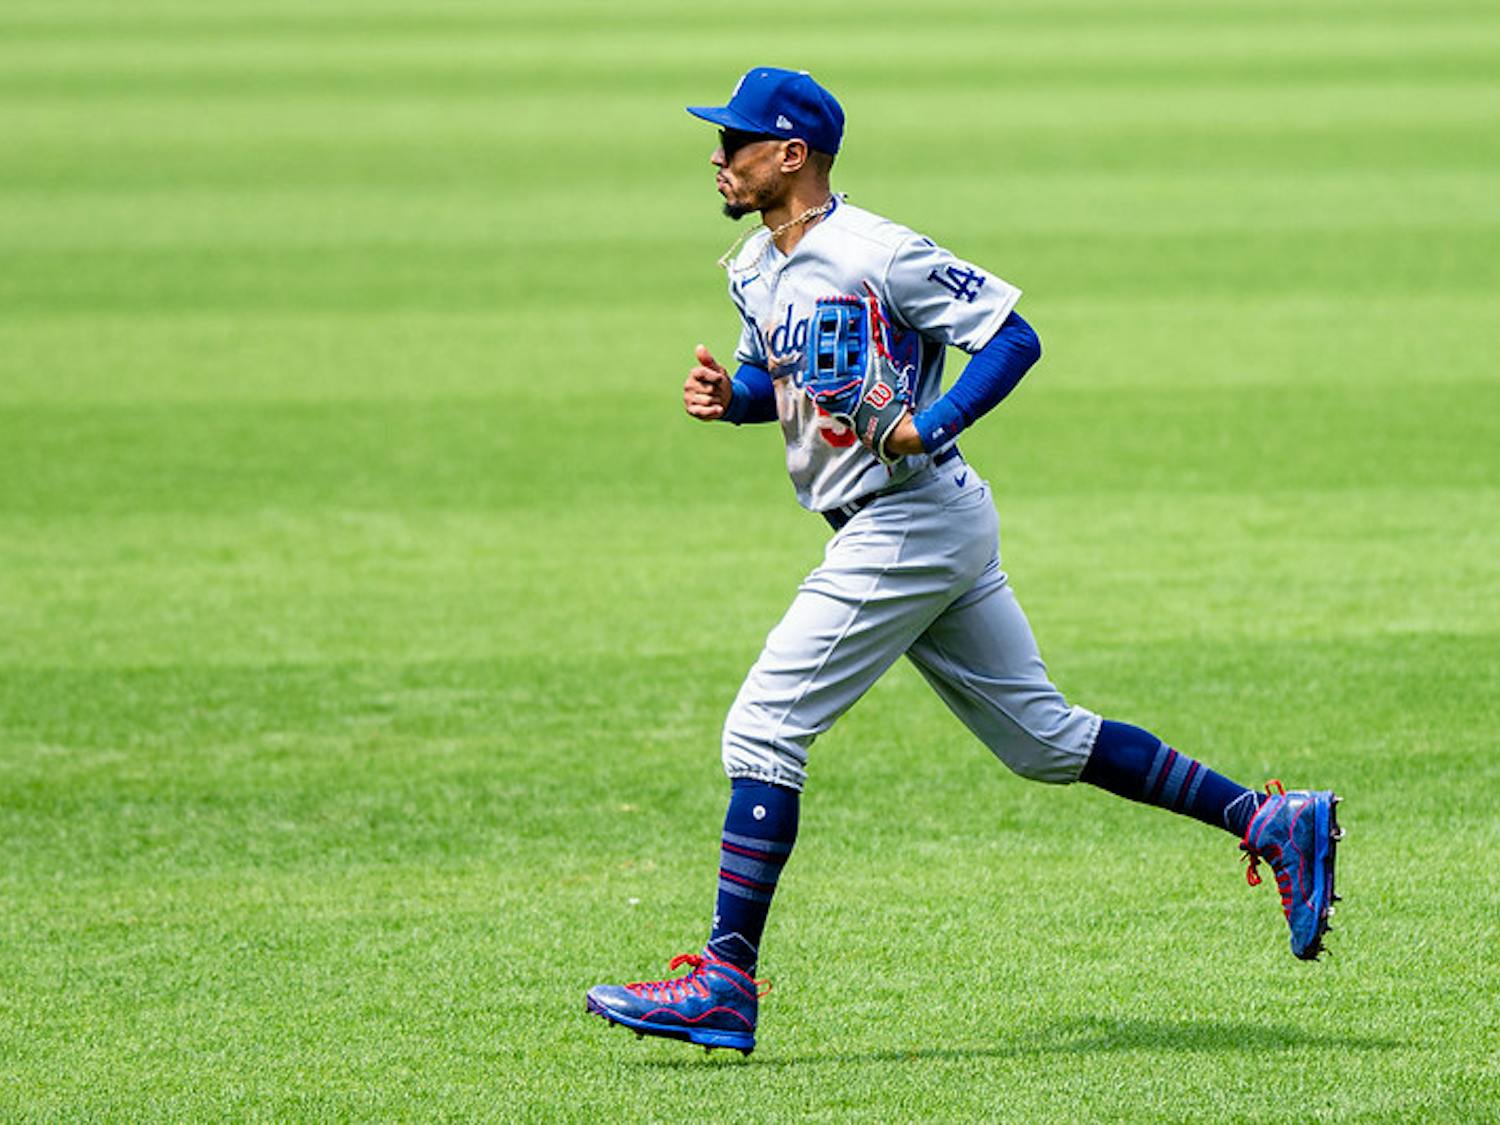 Dodgers shortstop Mookie Betts is the early season favorite for NL MVP (Photo courtesy of Erik Drost / Flickr).